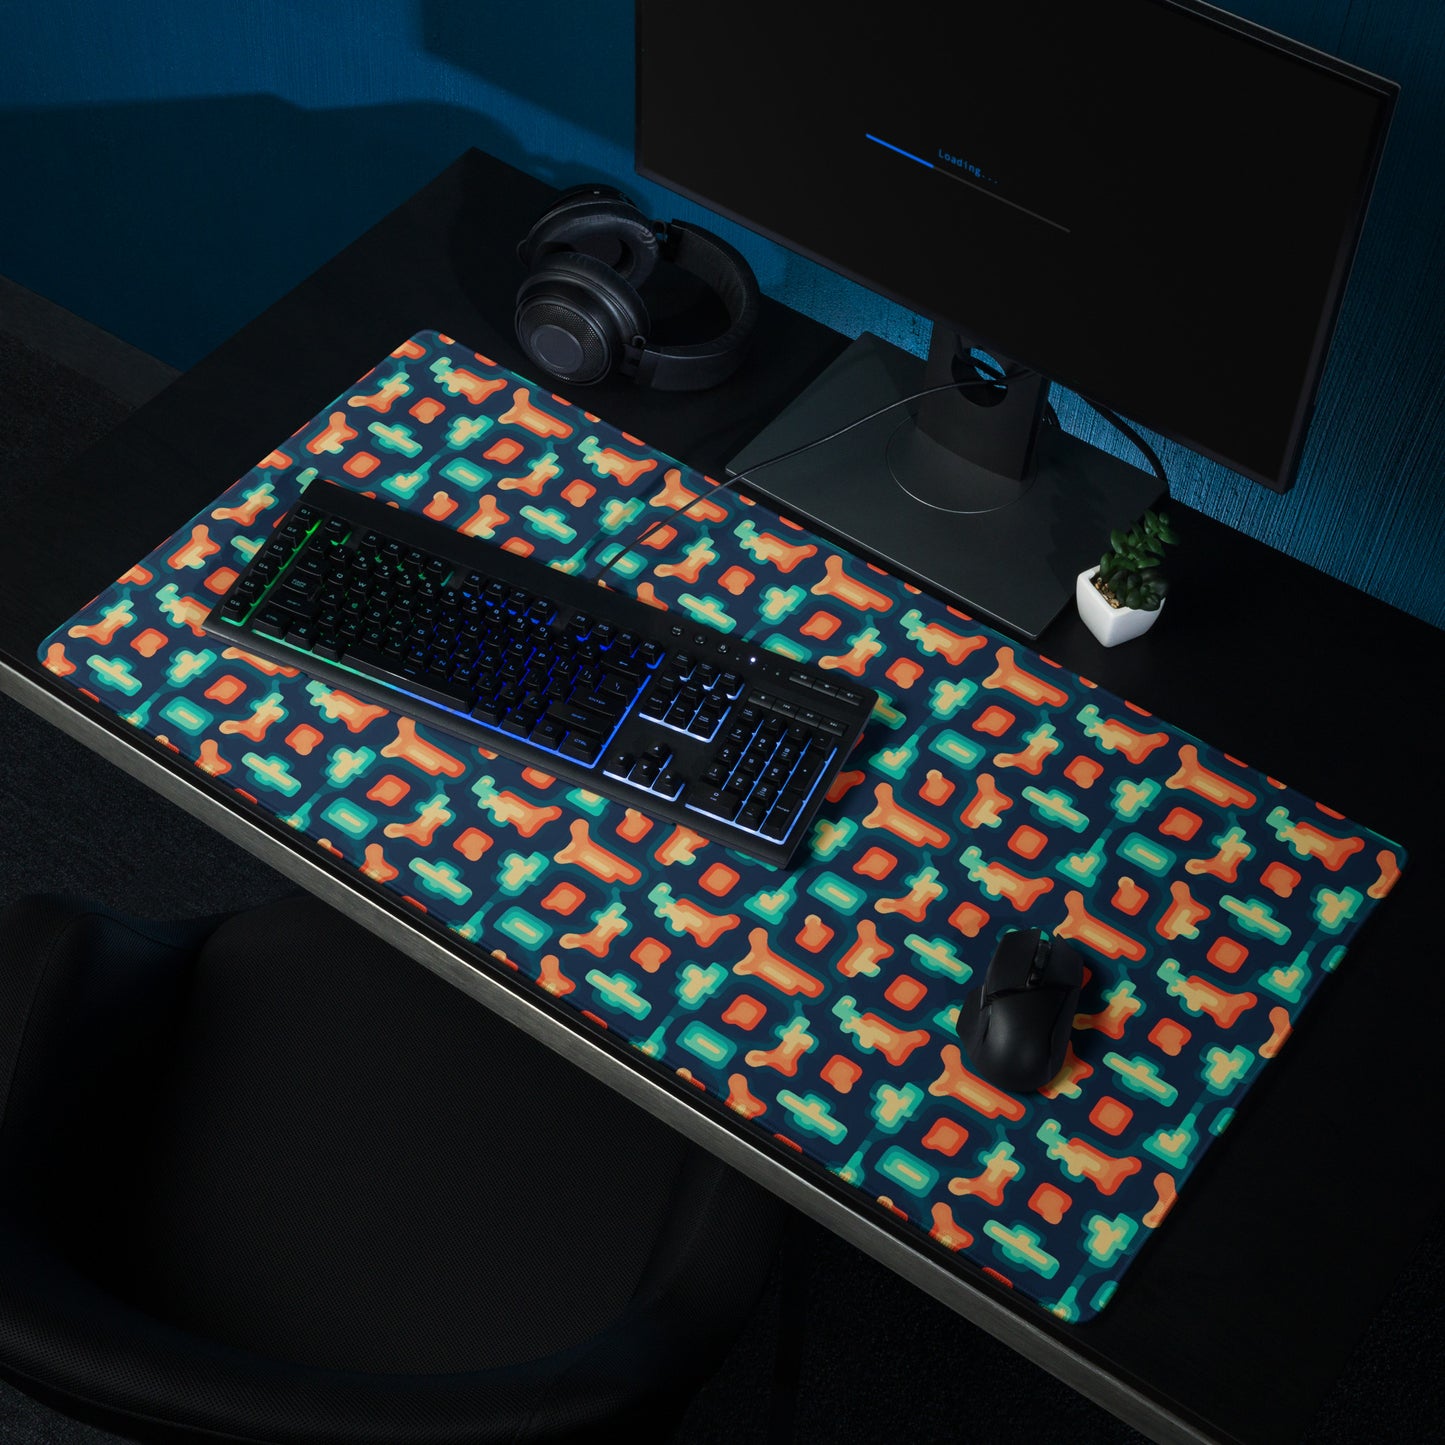 A 36" x 18" gaming desk pad with blue and orange puzzle pieces on a dark blue background. It sits on a black desk with a keyboard, monitor, and mouse.